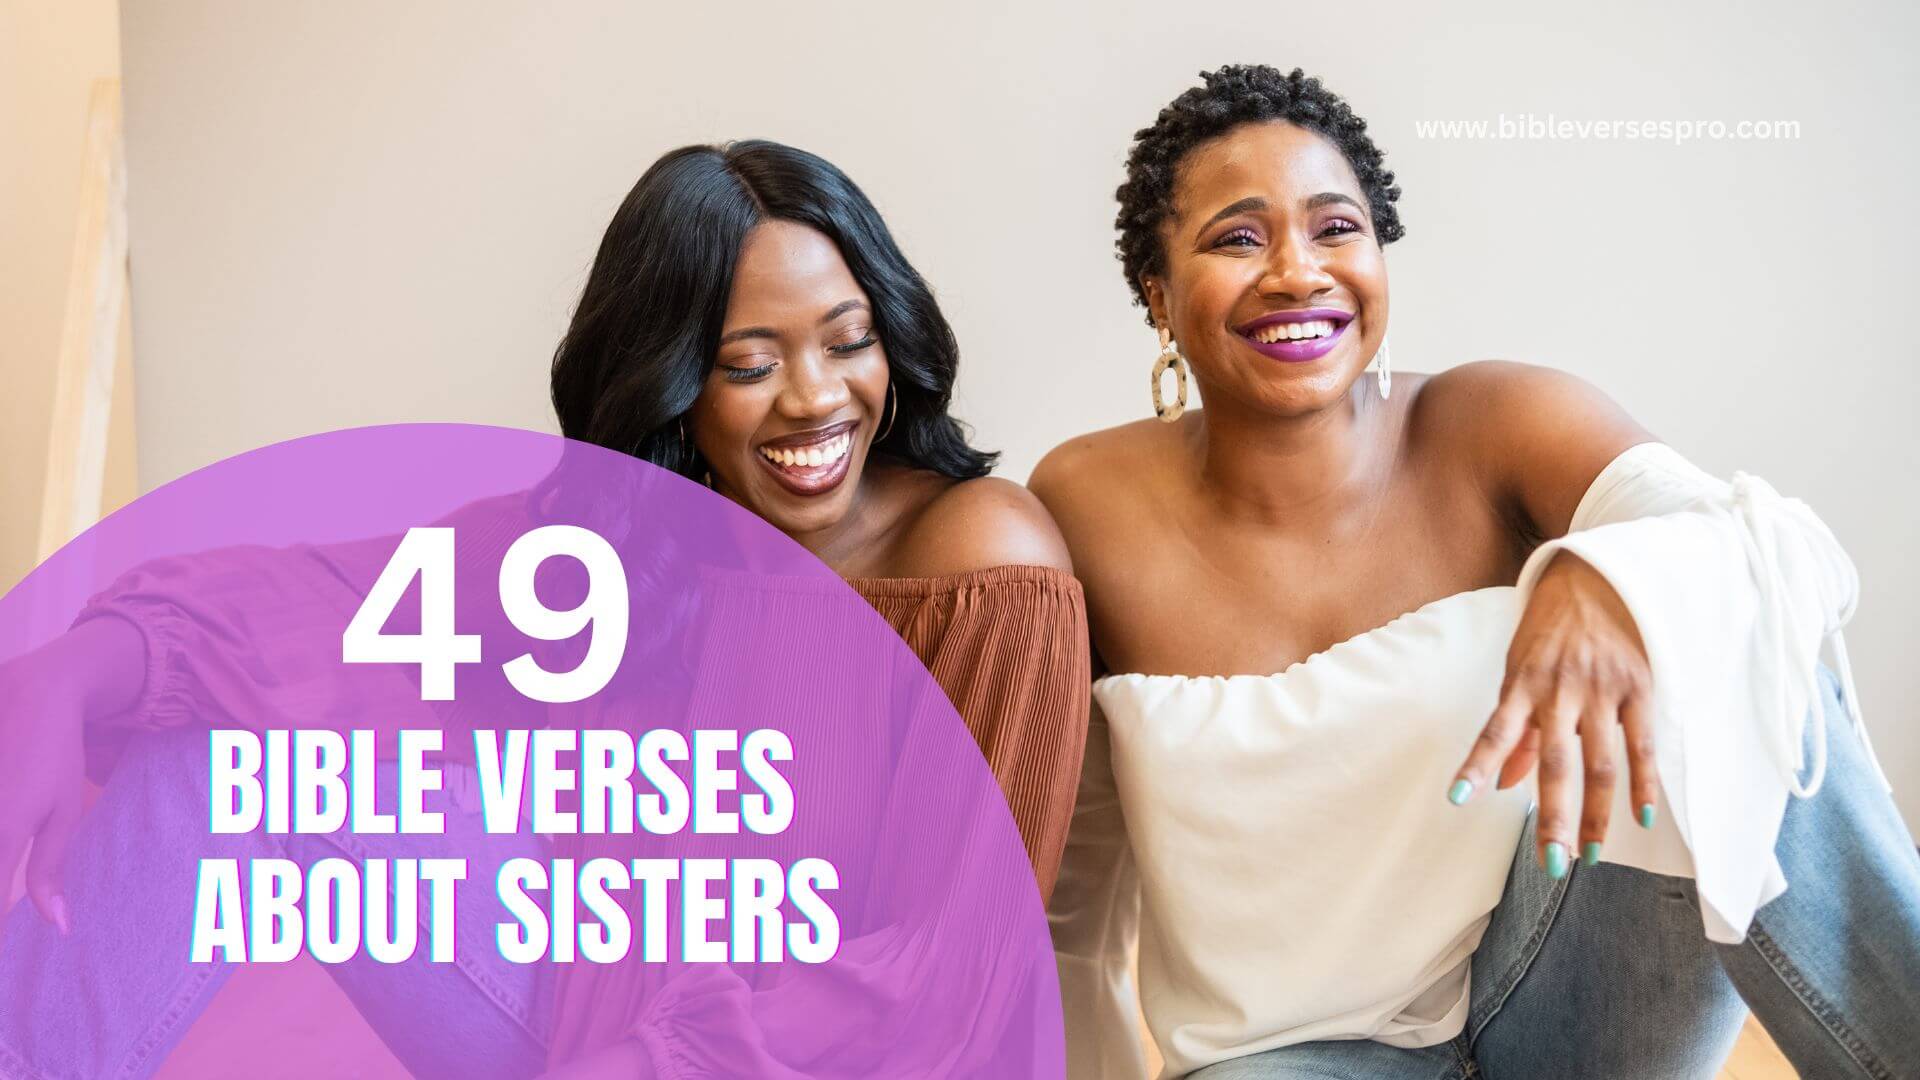 BIBLE VERSES ABOUT SISTERS (1)